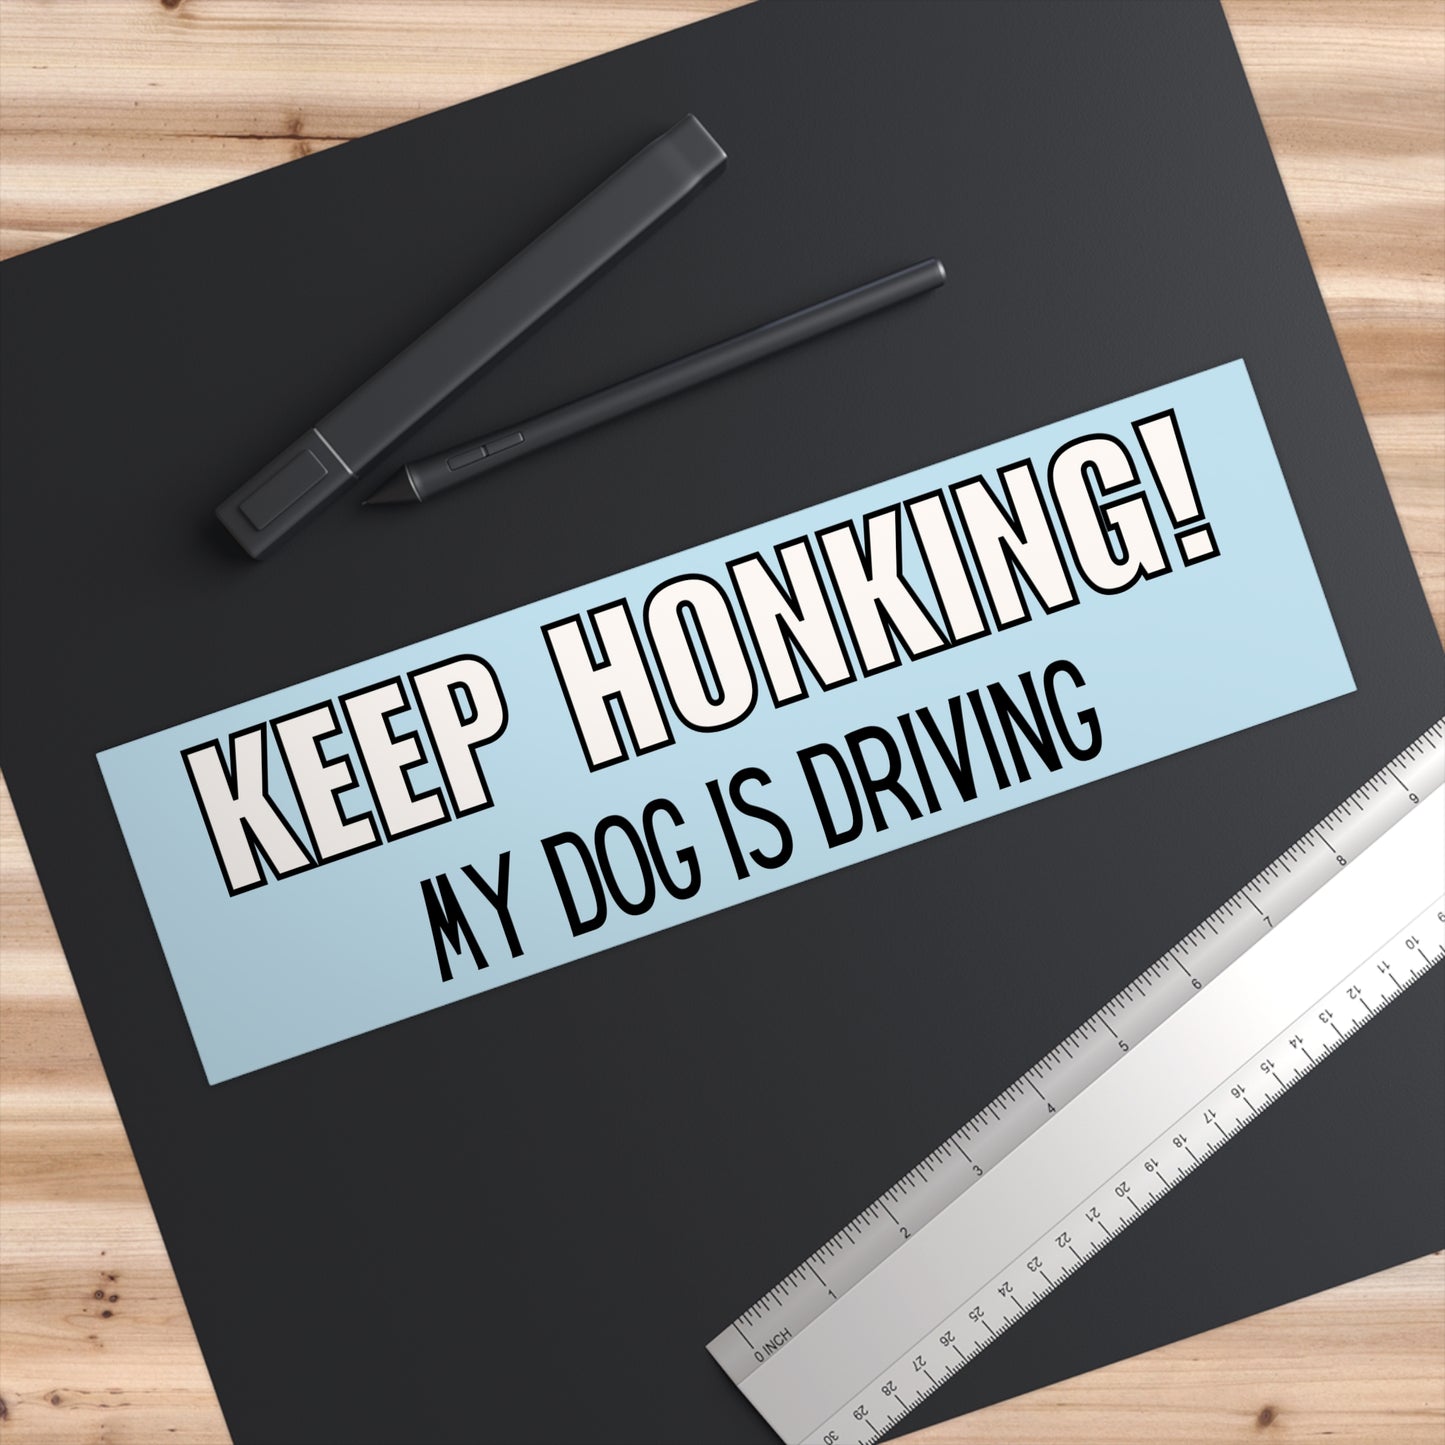 "Keep Honking! My dog is driving" Bumper Sticker